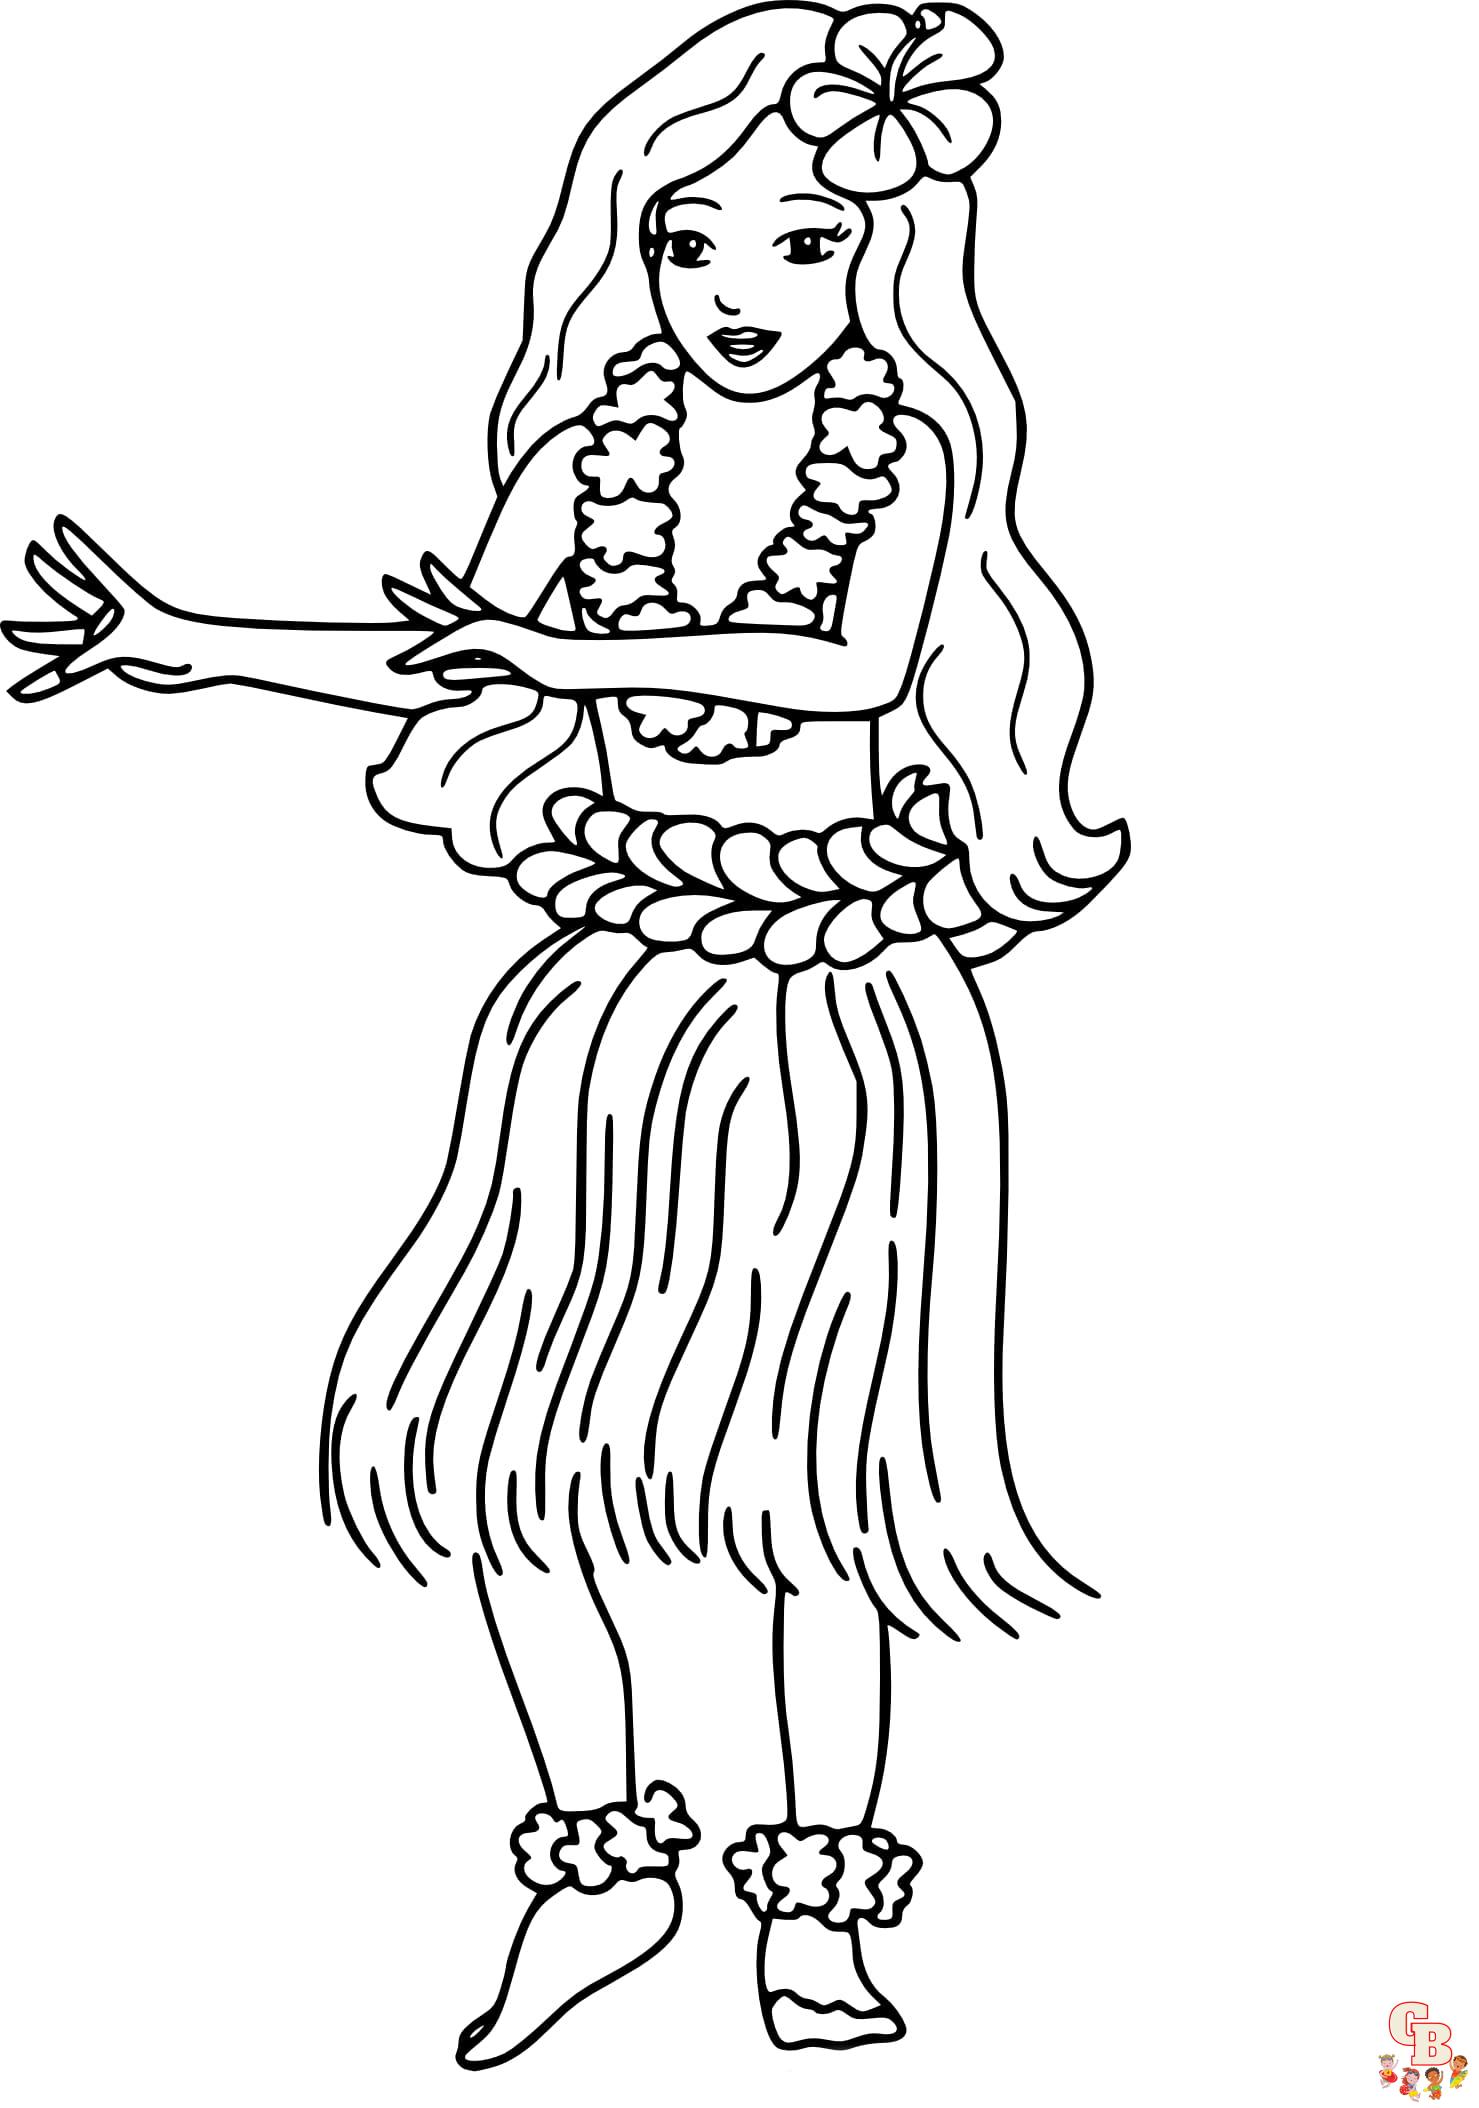 easy hawaii coloring pages